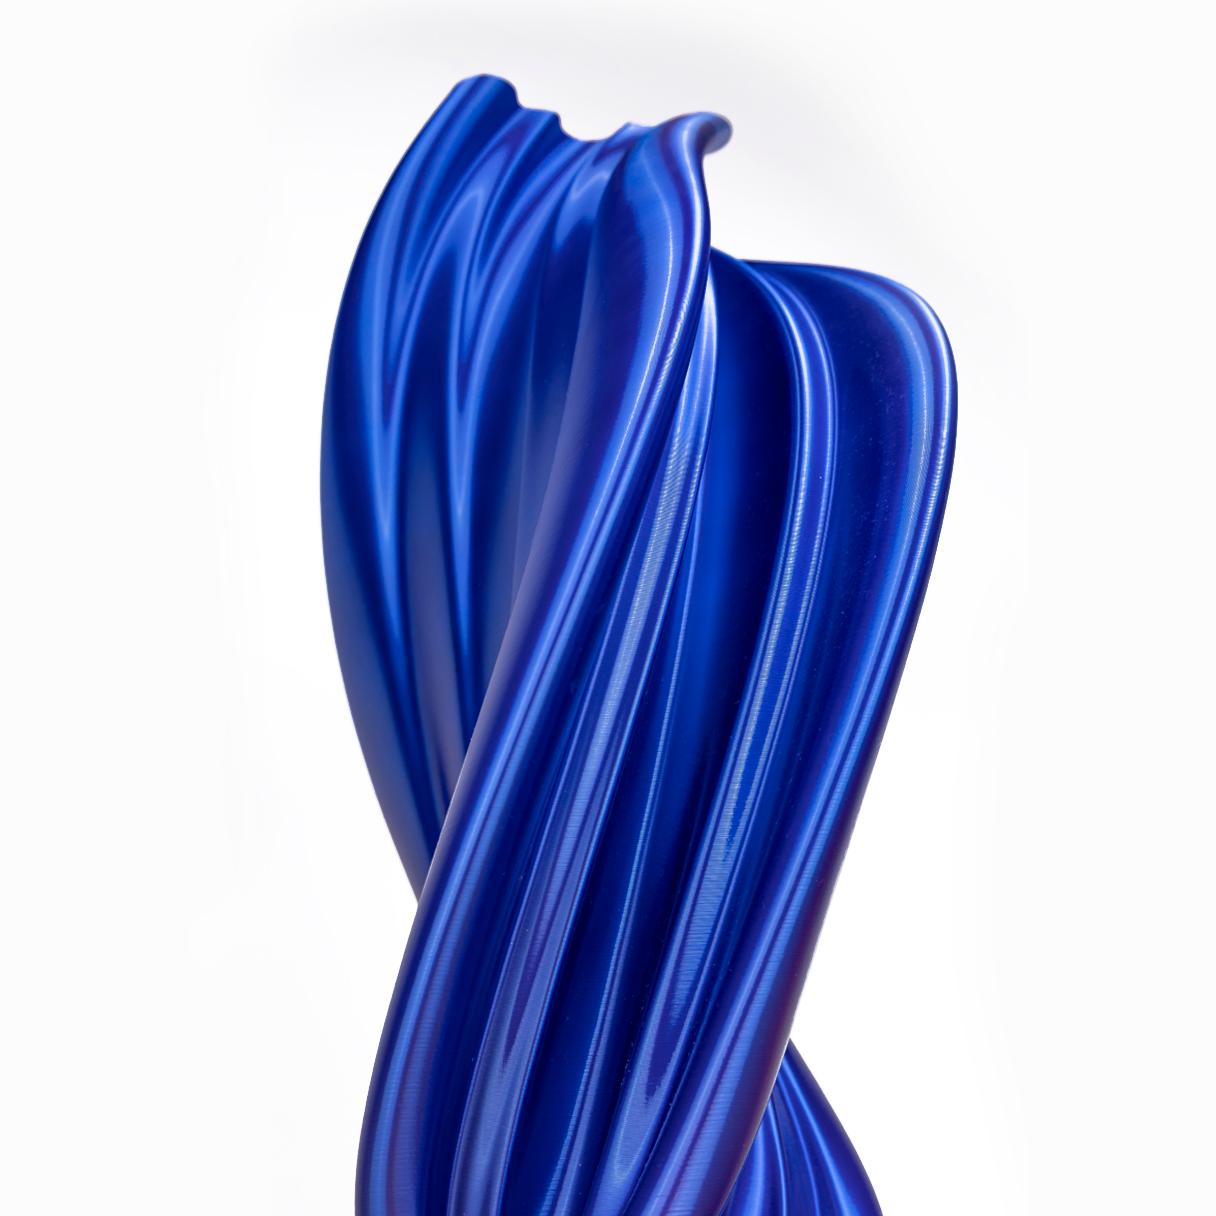 Damocle, Blue Contemporary Sustainable Vase-Sculpture For Sale 2